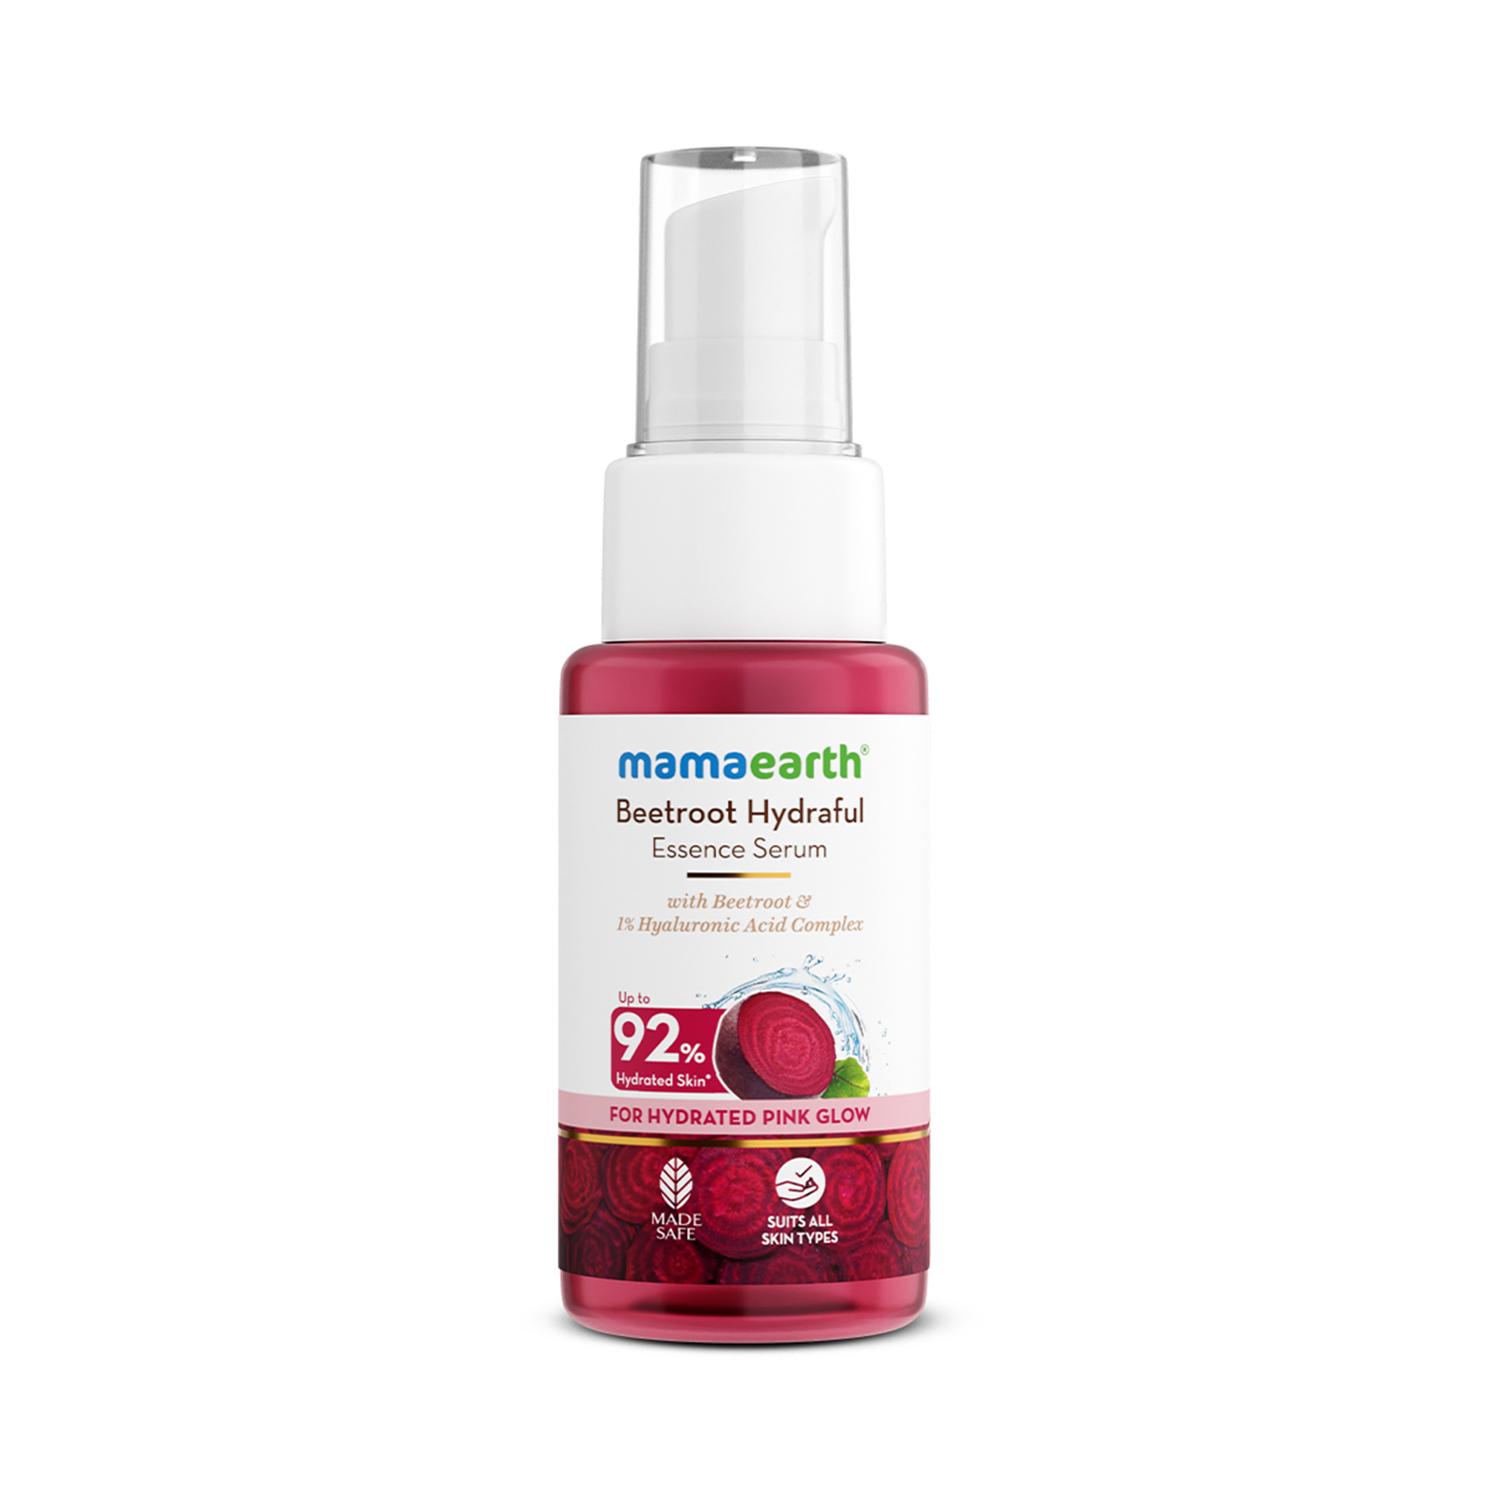 Mamaearth | Mamaearth Beetroot Hydraful Essence Serum - Hydrated Pink Glow with Beetroot & 1% Hyaluronic Acid (50 ml)